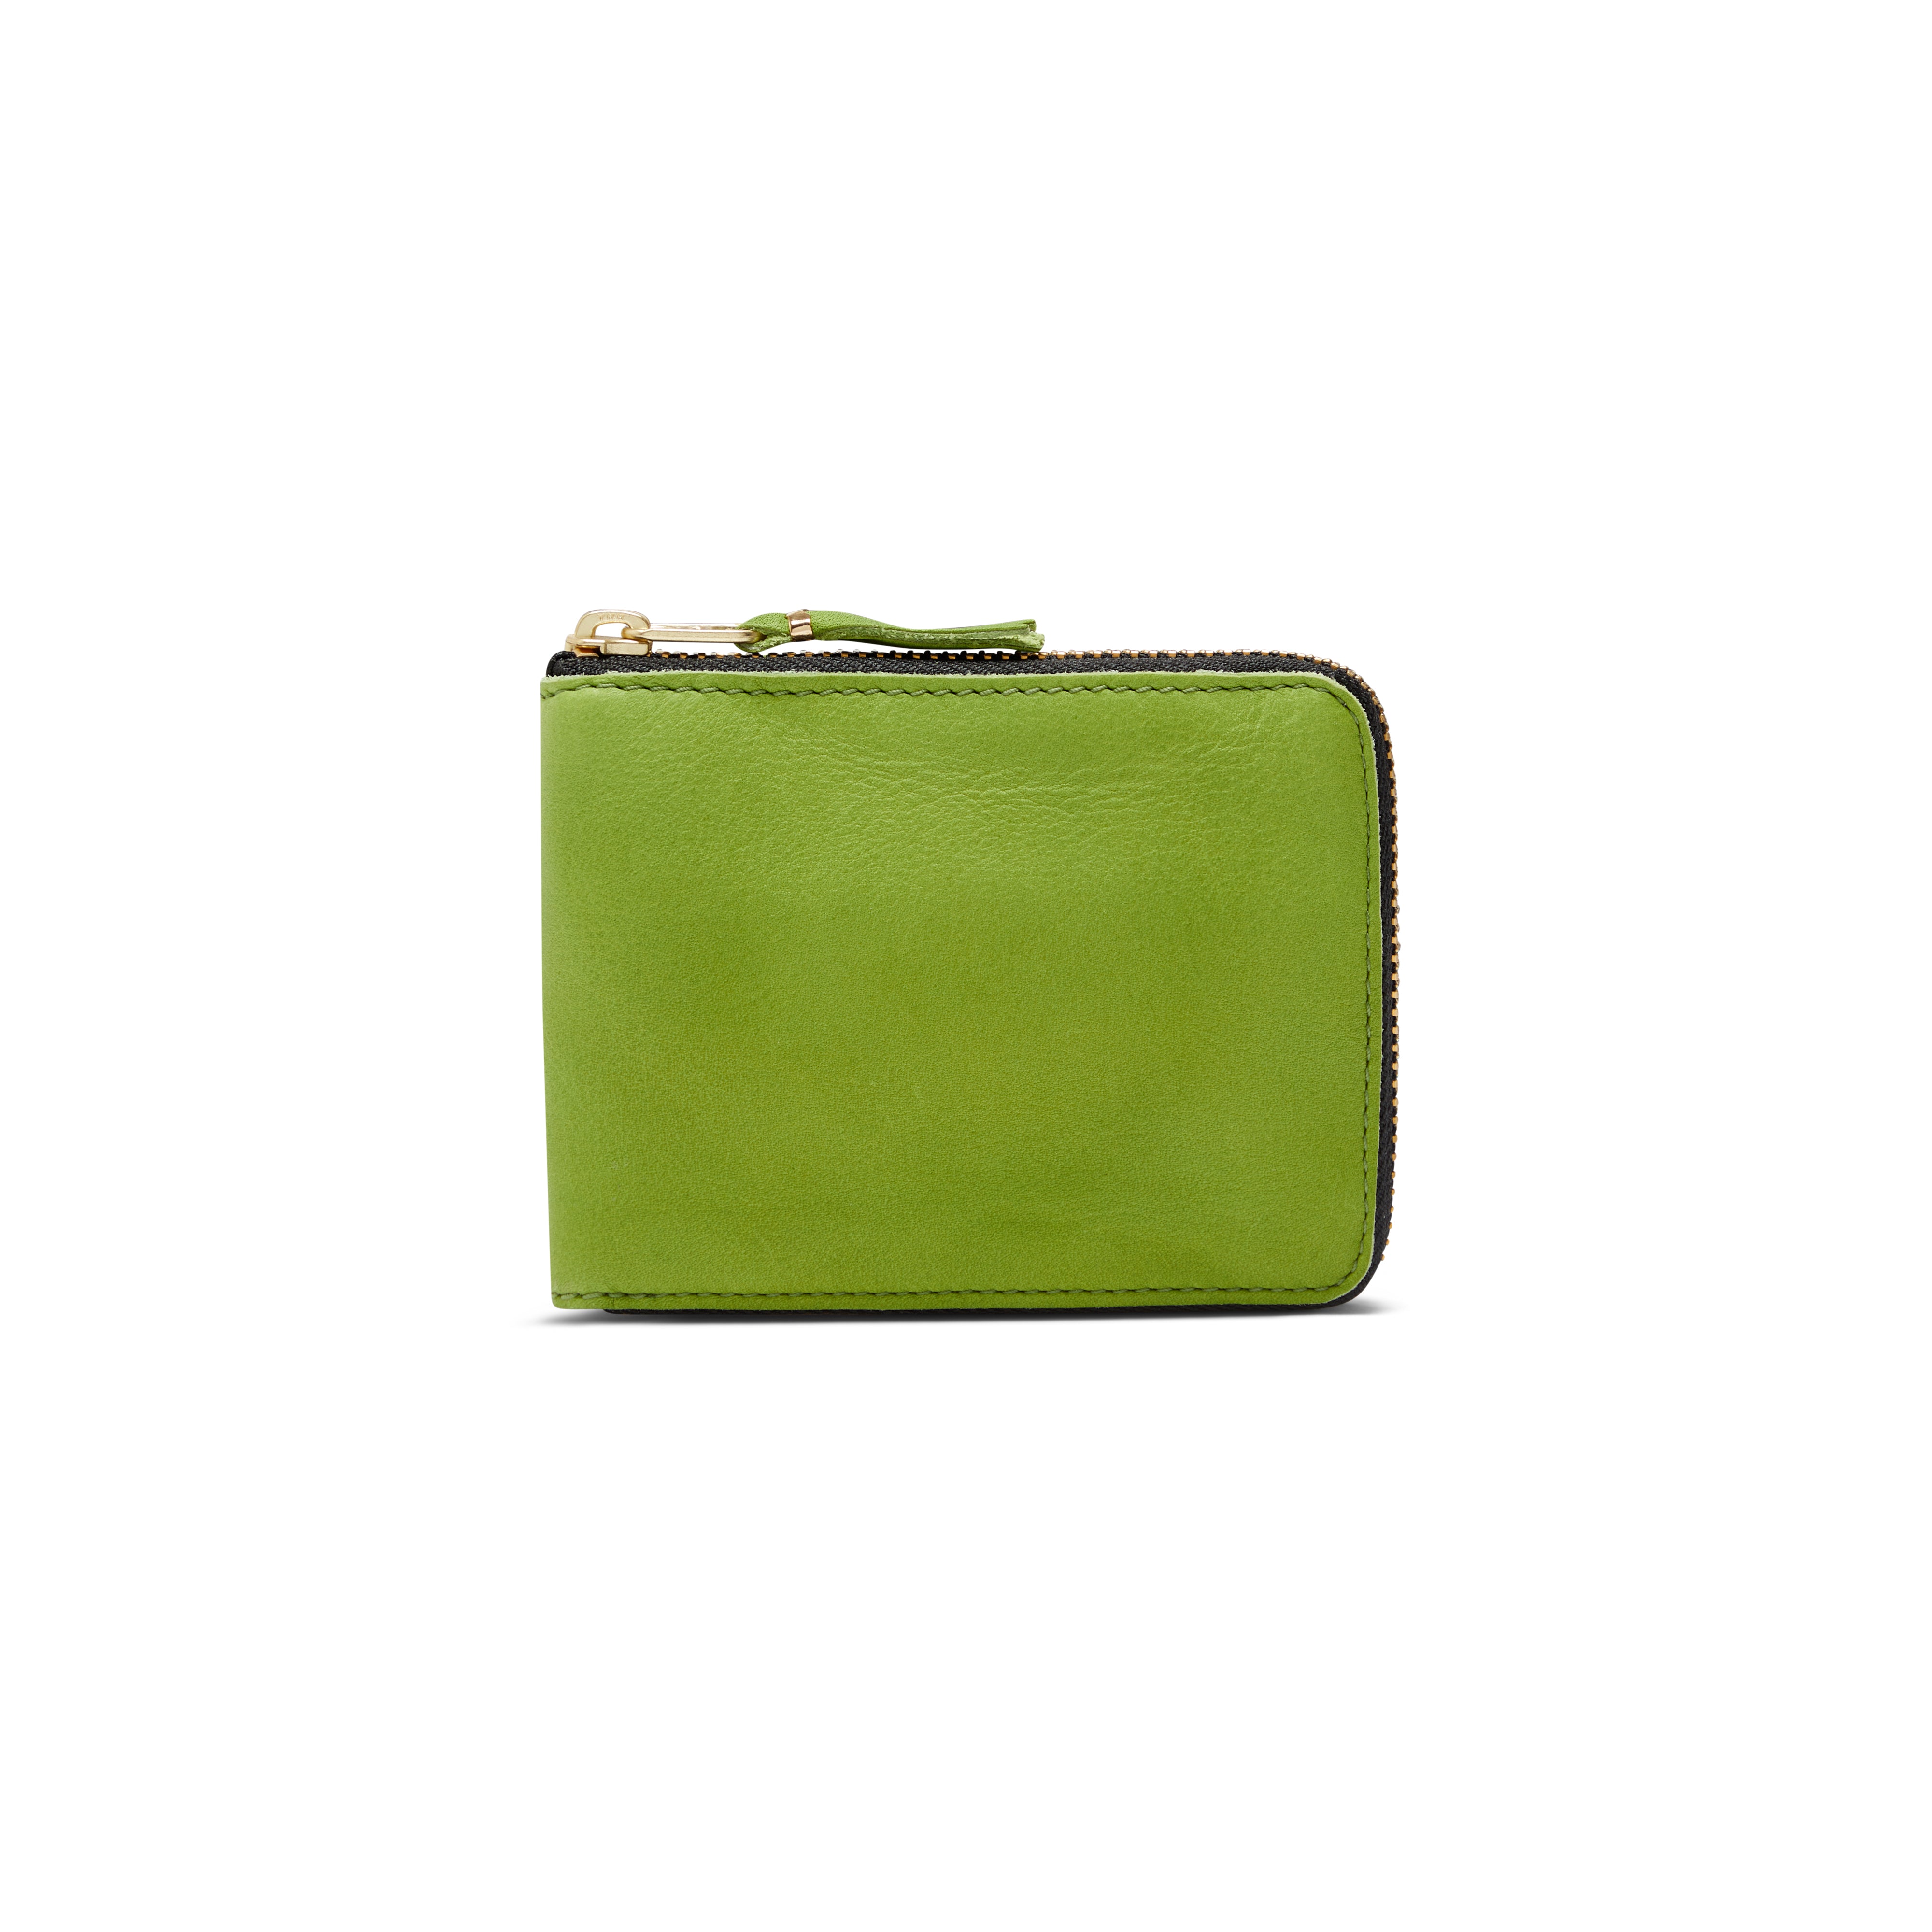 CDG Wallet - Washed Full Zip Around Wallet - (Green) 7100 – DSMNY E-SHOP